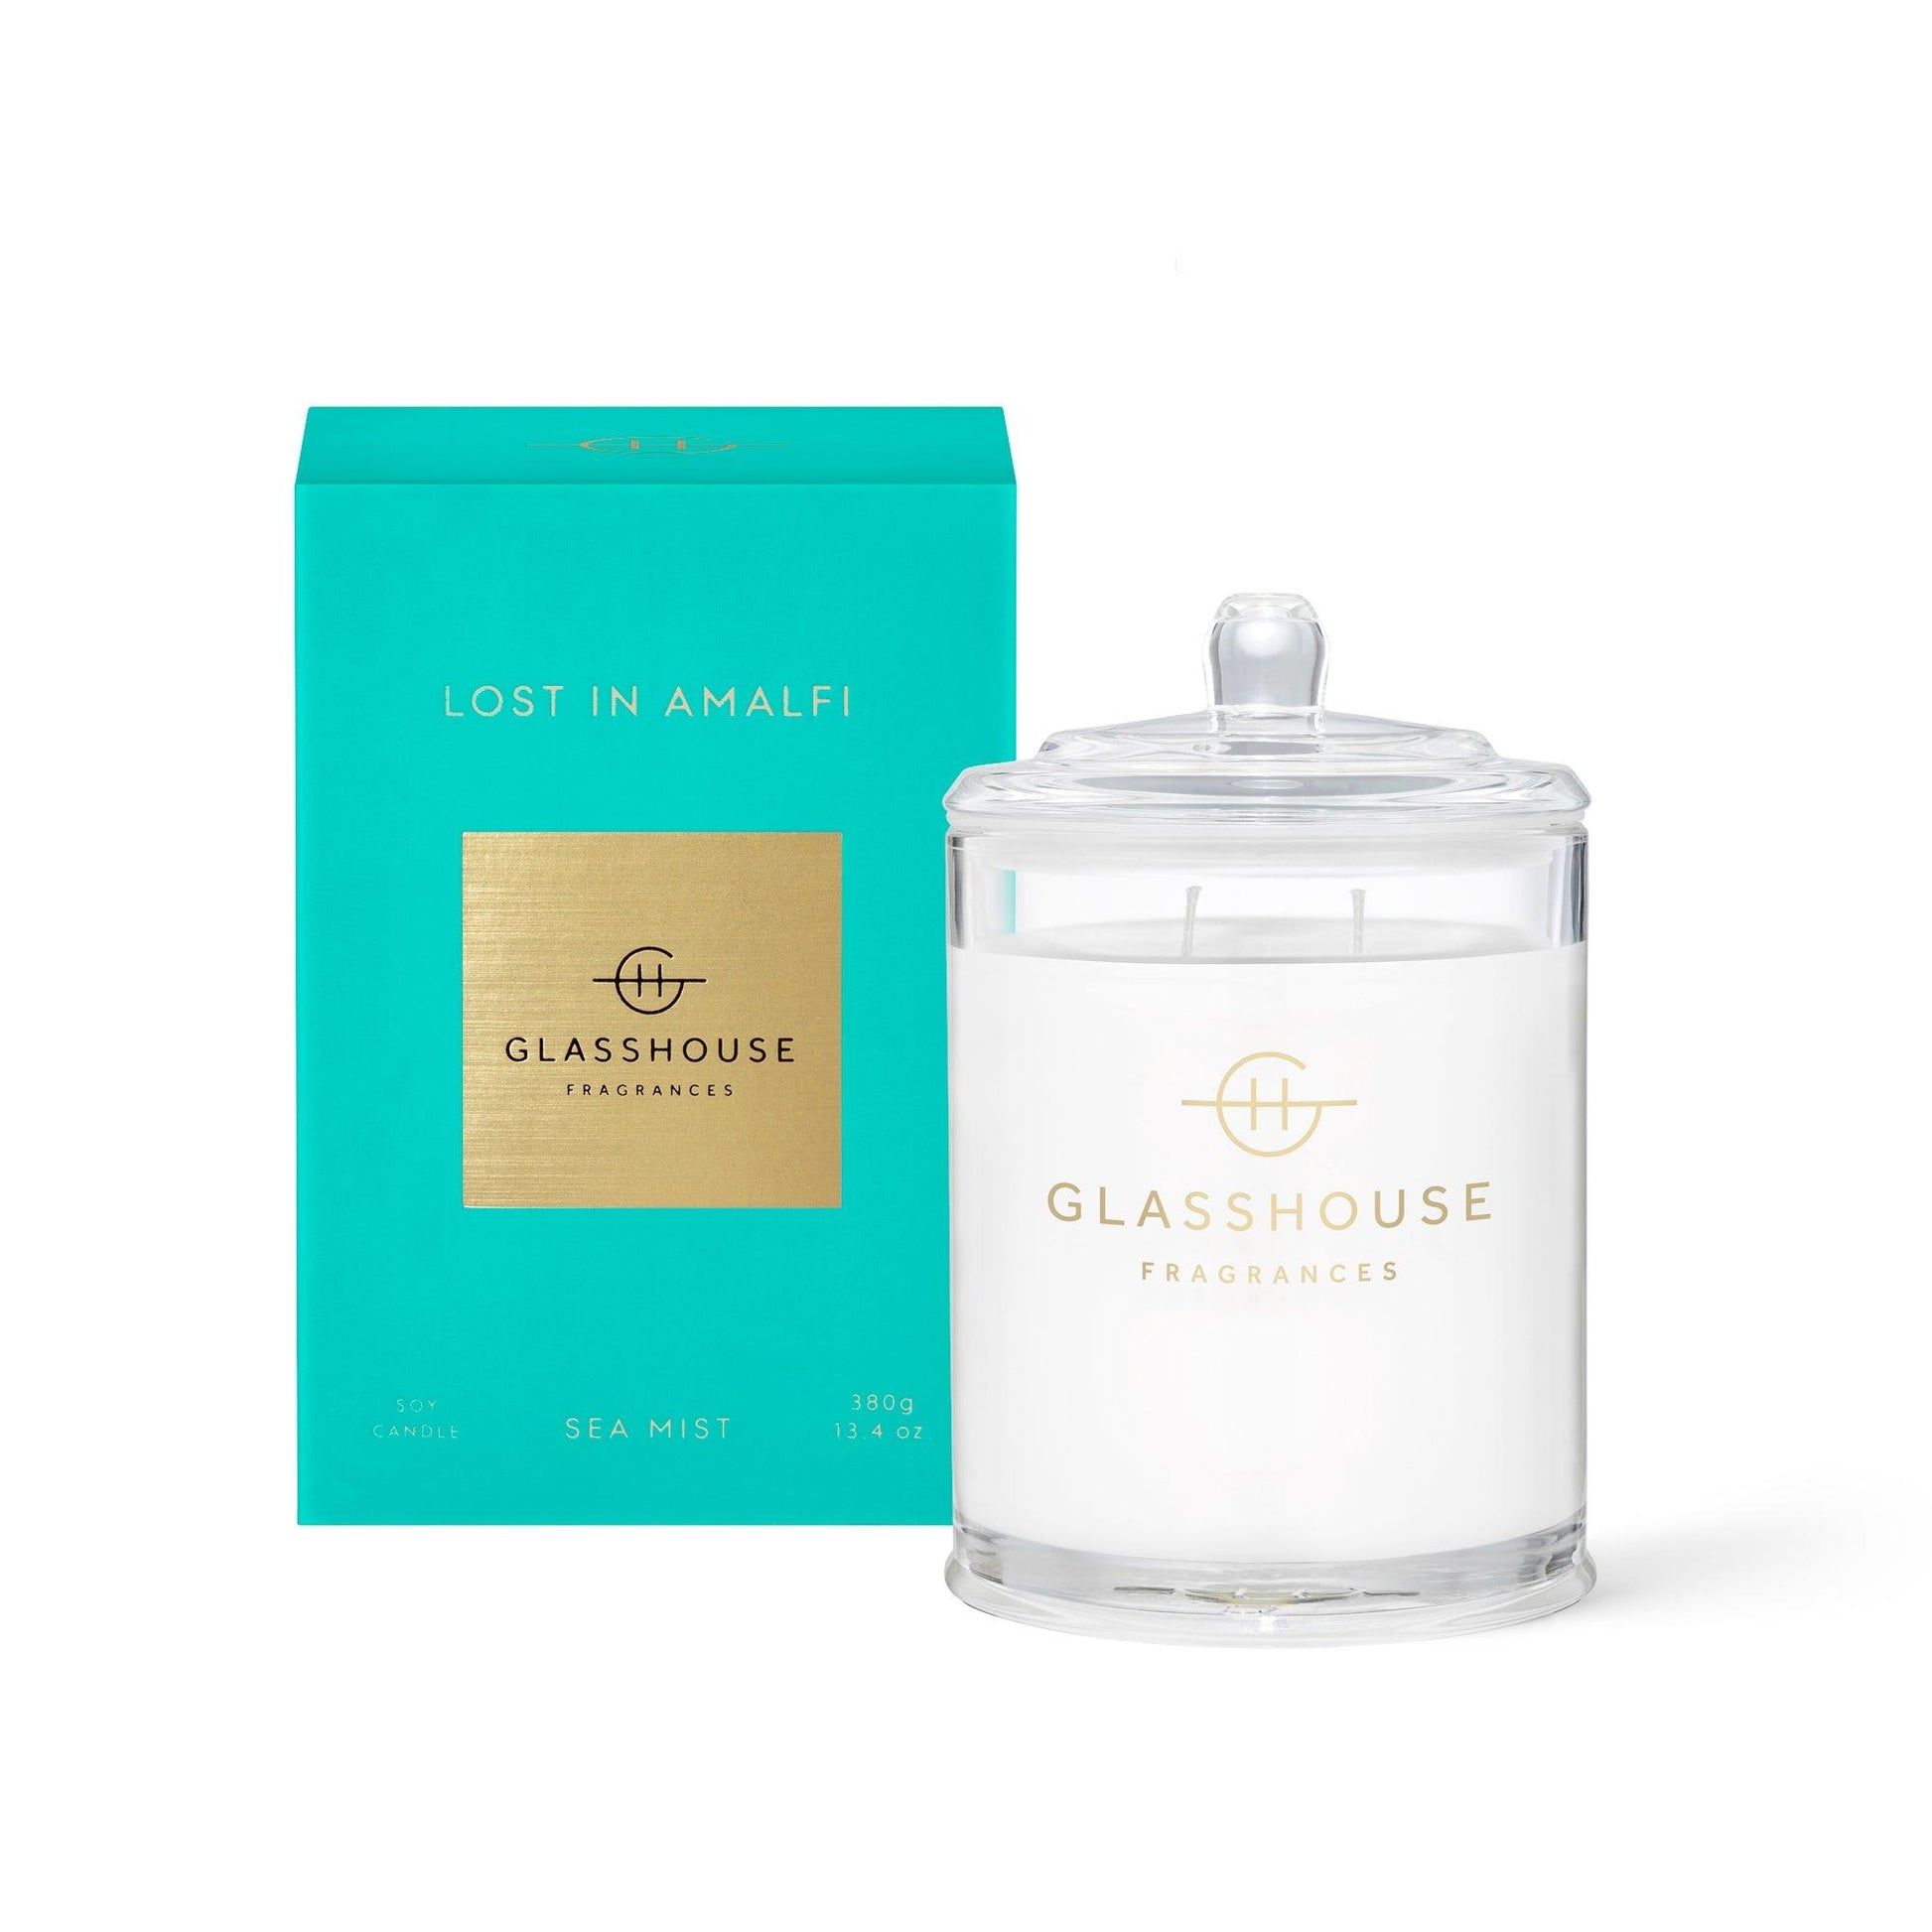 GF 380g LOST IN AMALFI Candle - Handworks Nouveau Paperie